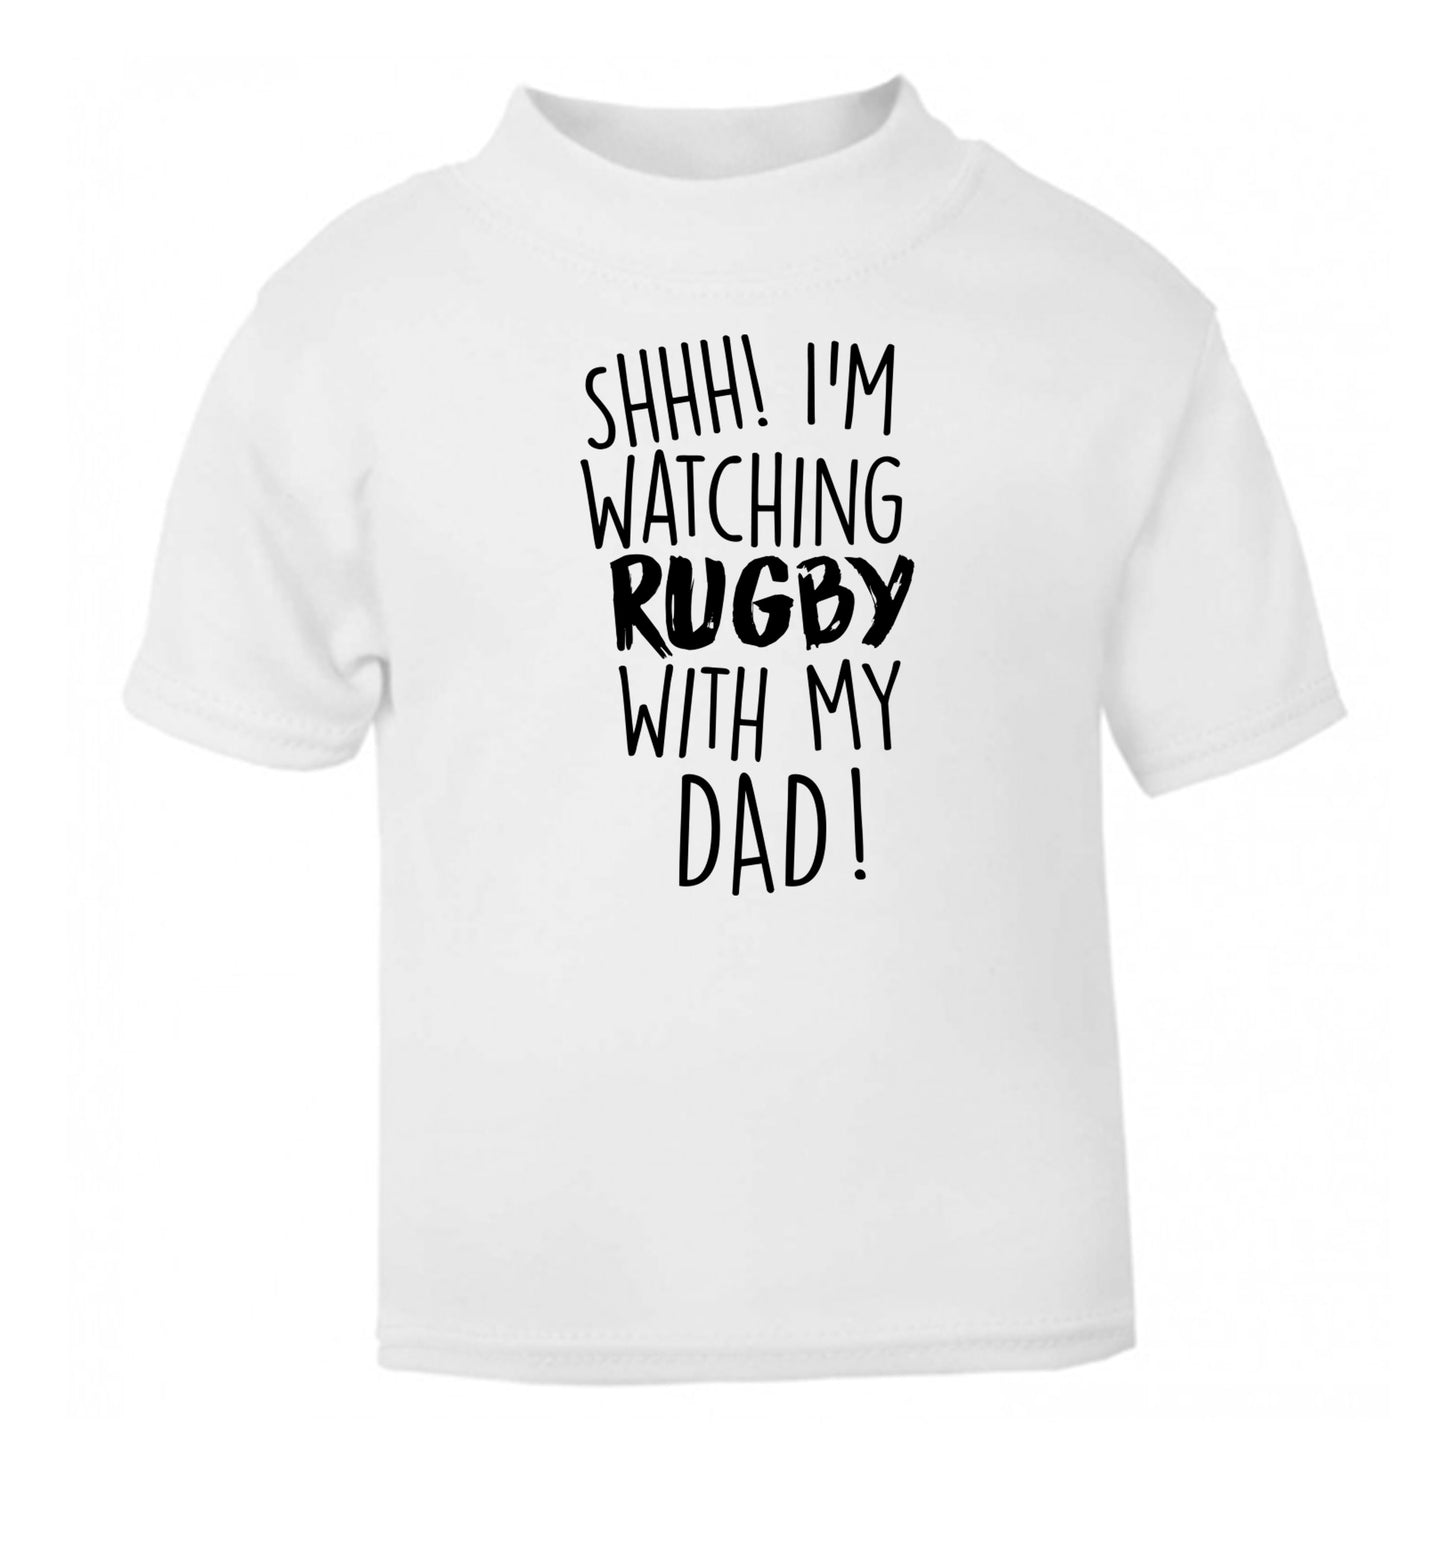 Shh... I'm watching rugby with my dad white Baby Toddler Tshirt 2 Years